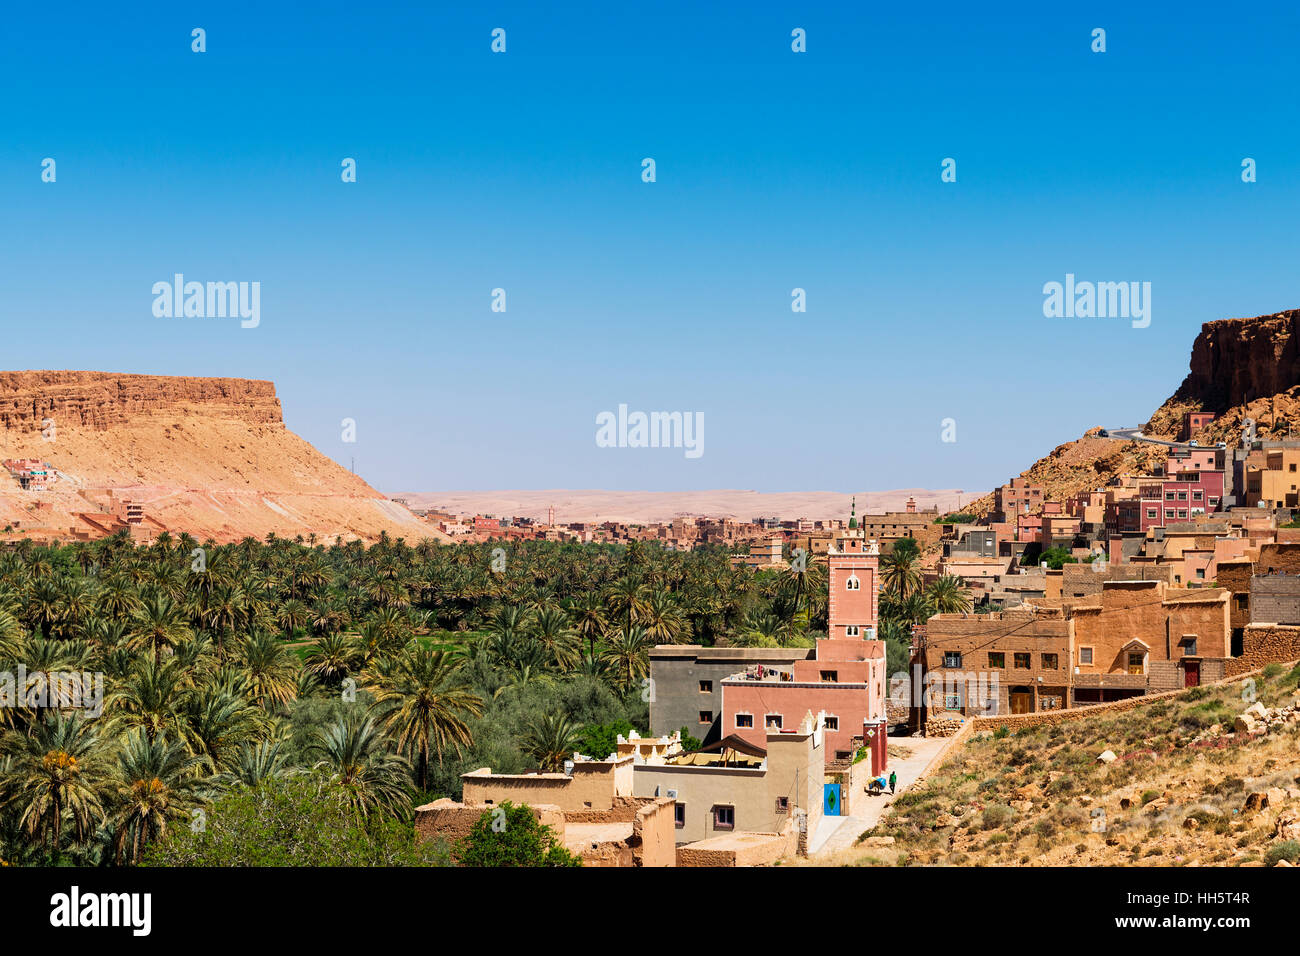 Berber village near the Dades Gorge in Morocco, North Africa Stock Photo